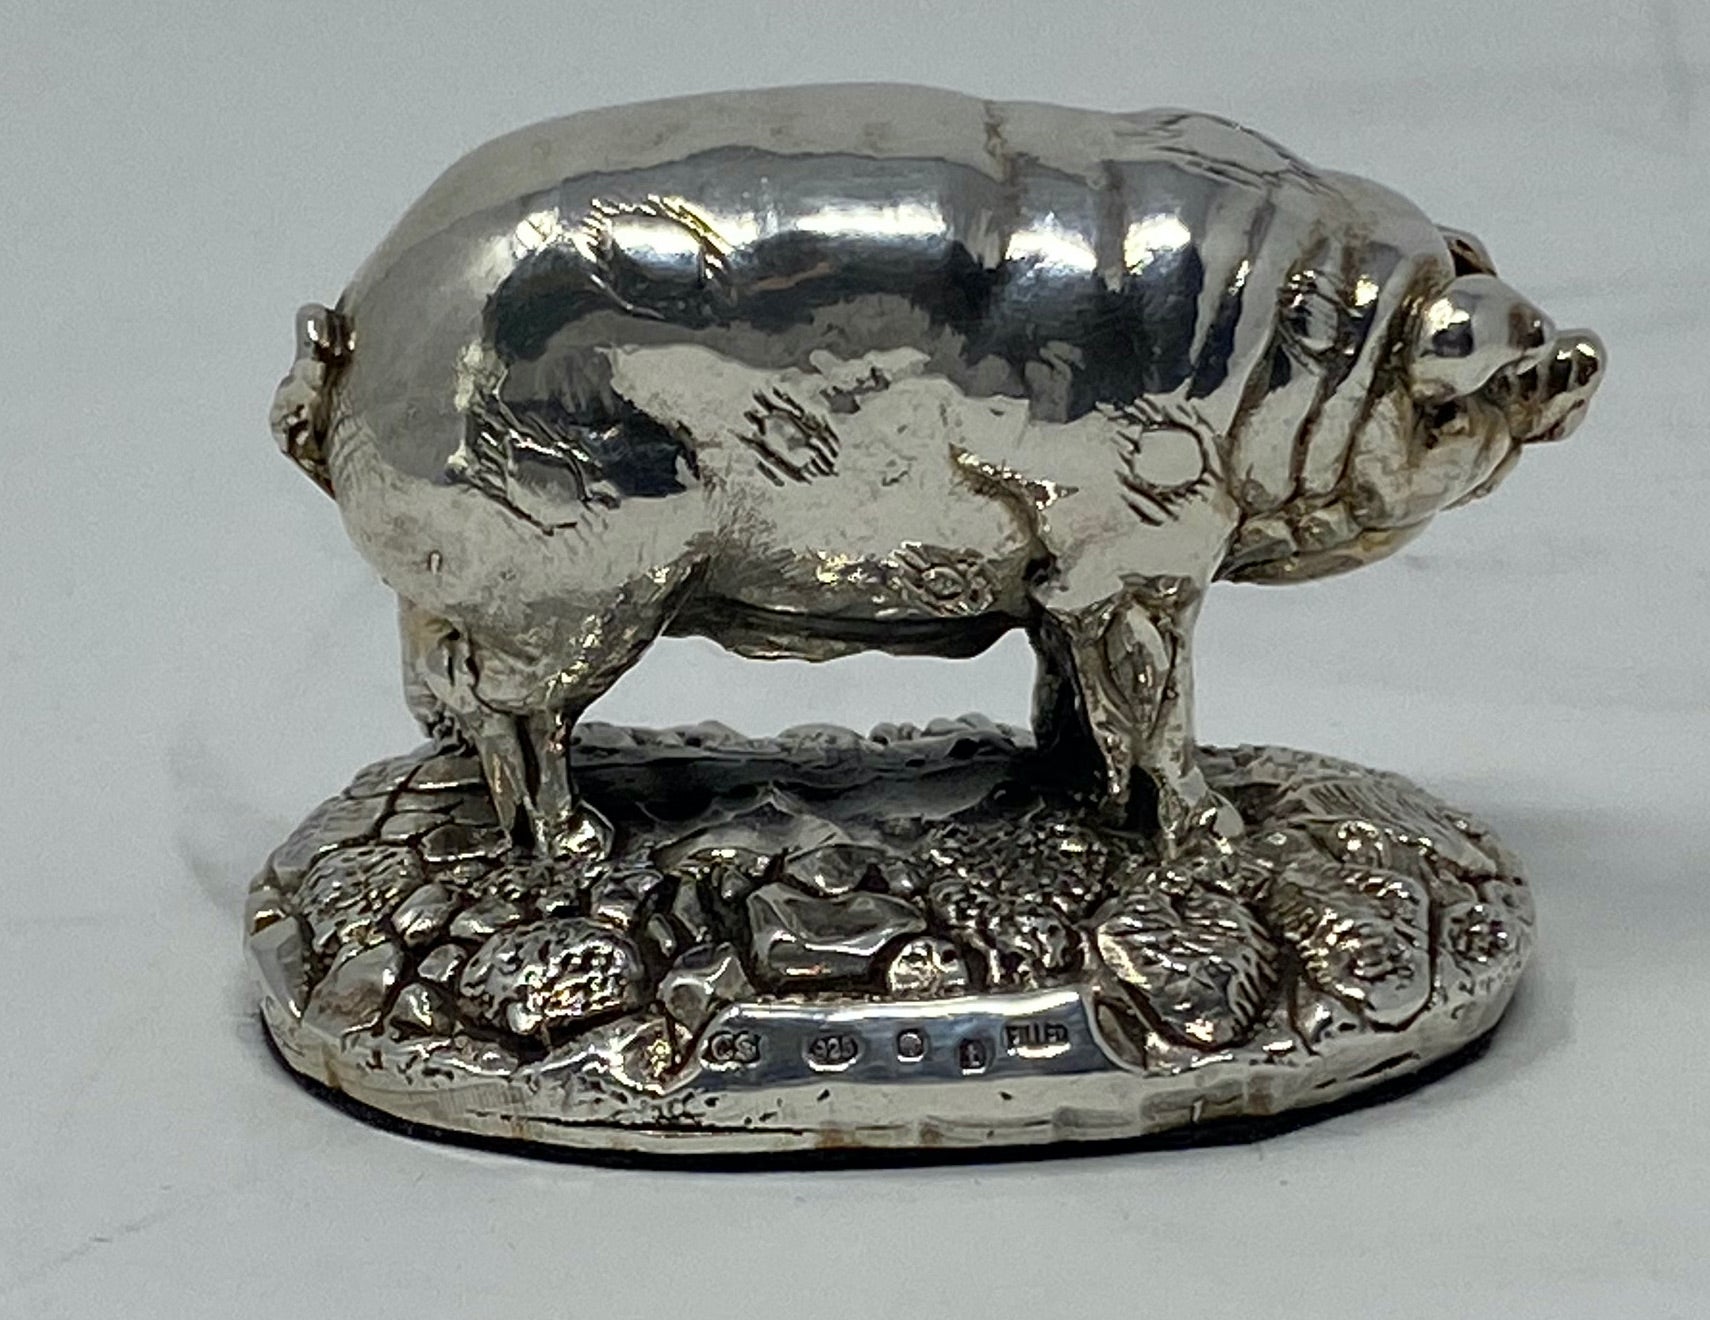 Silver Pig